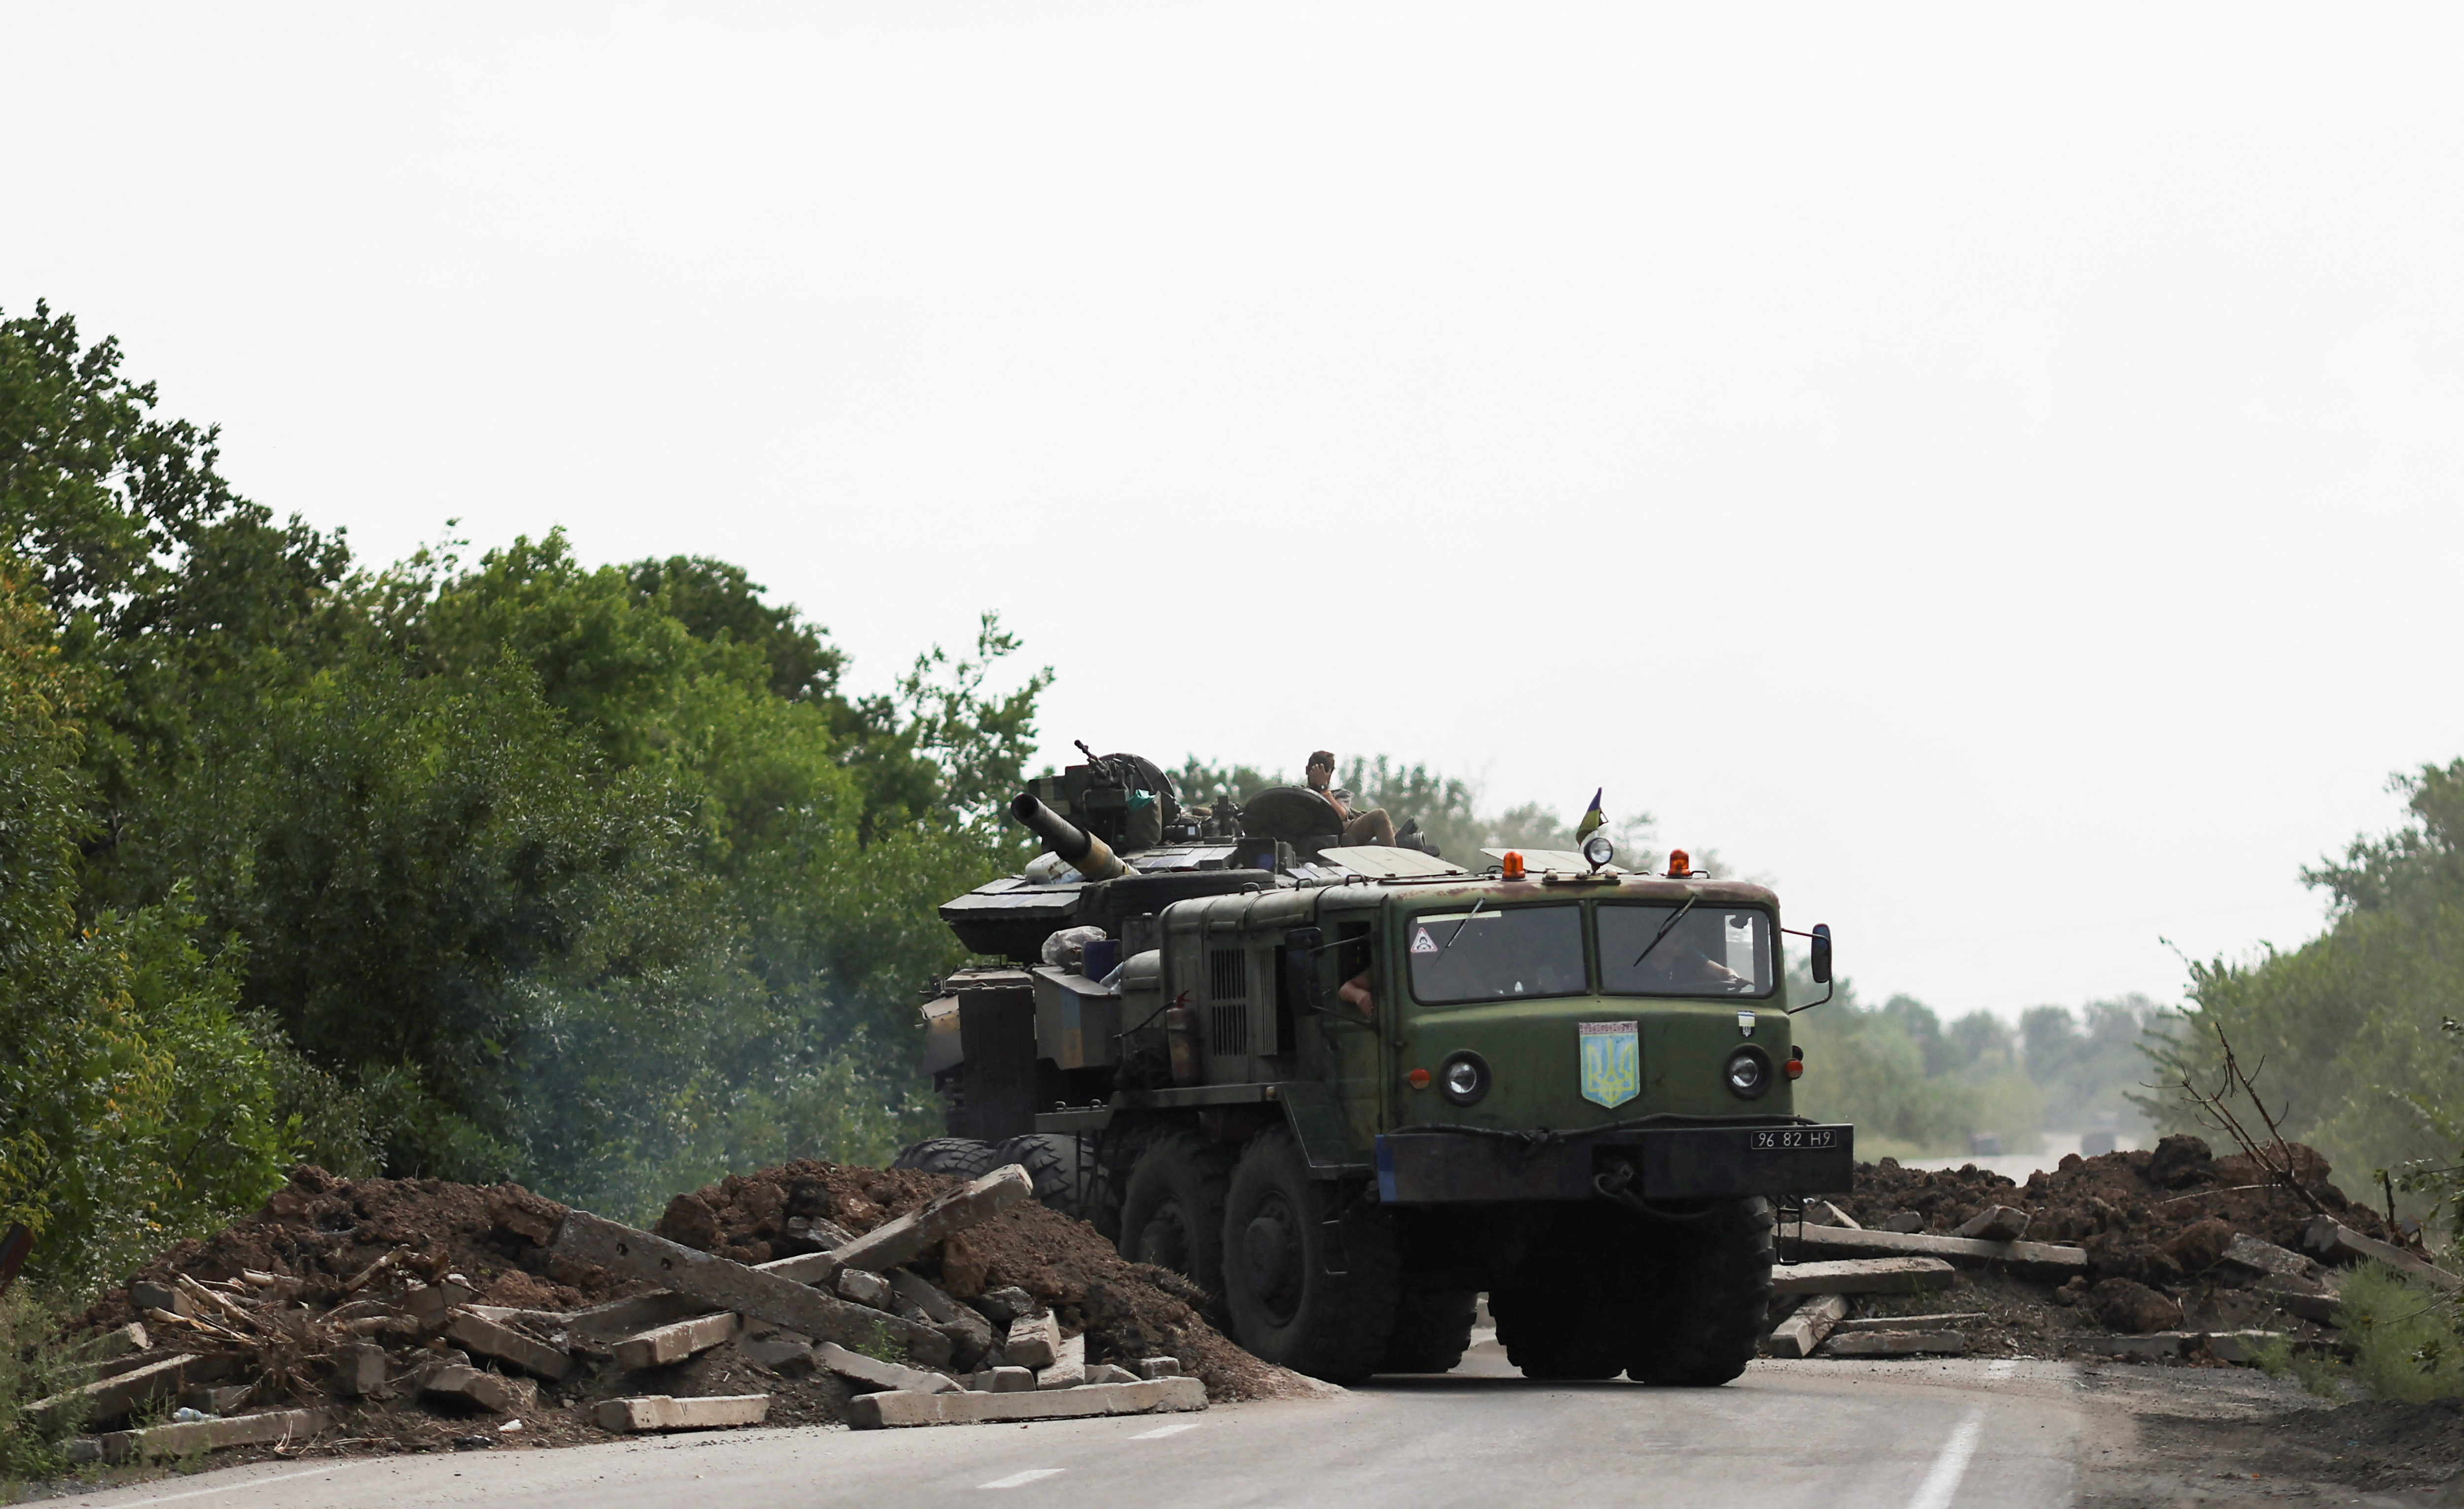 A Ukrainian serviceman gestures on a tank, as it is towed away by a military truck near Bakhmut